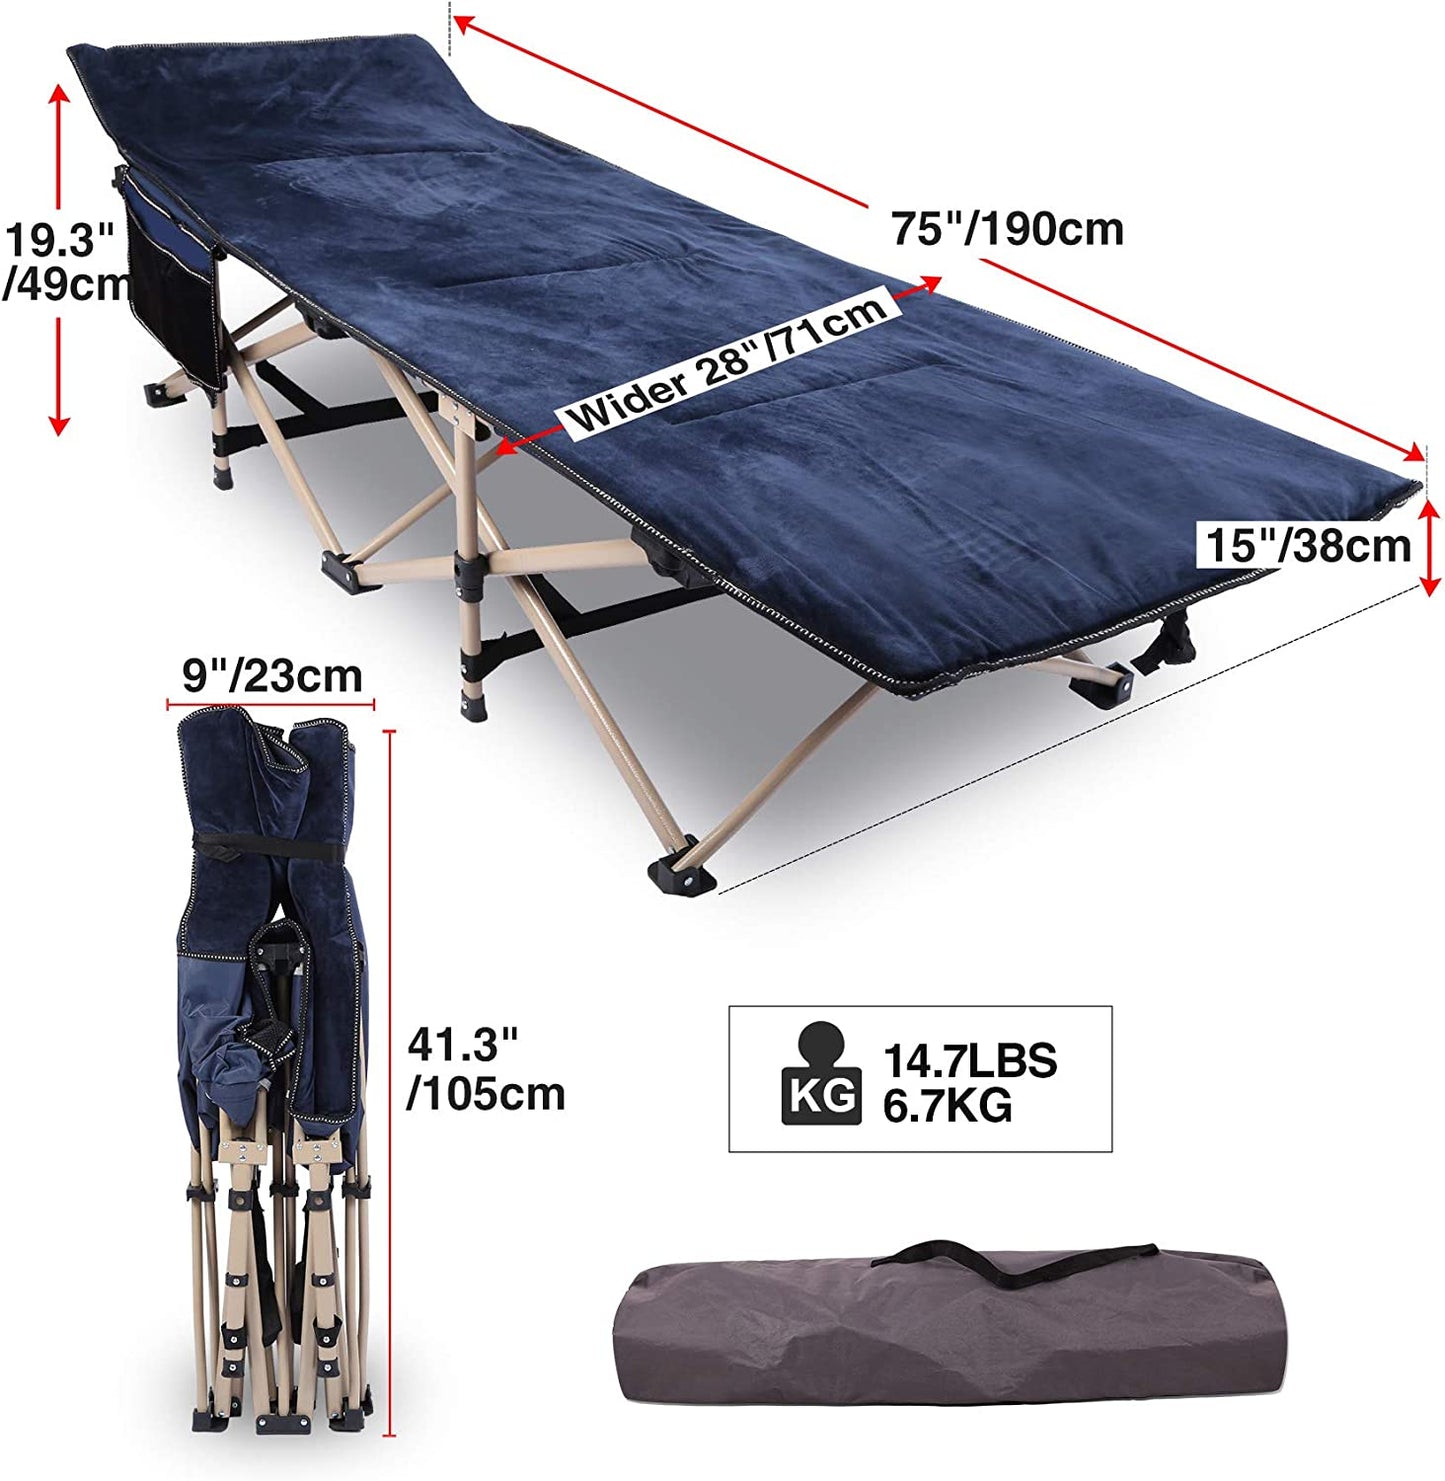 REDCAMP Folding Camping Beds for adults with Mattress